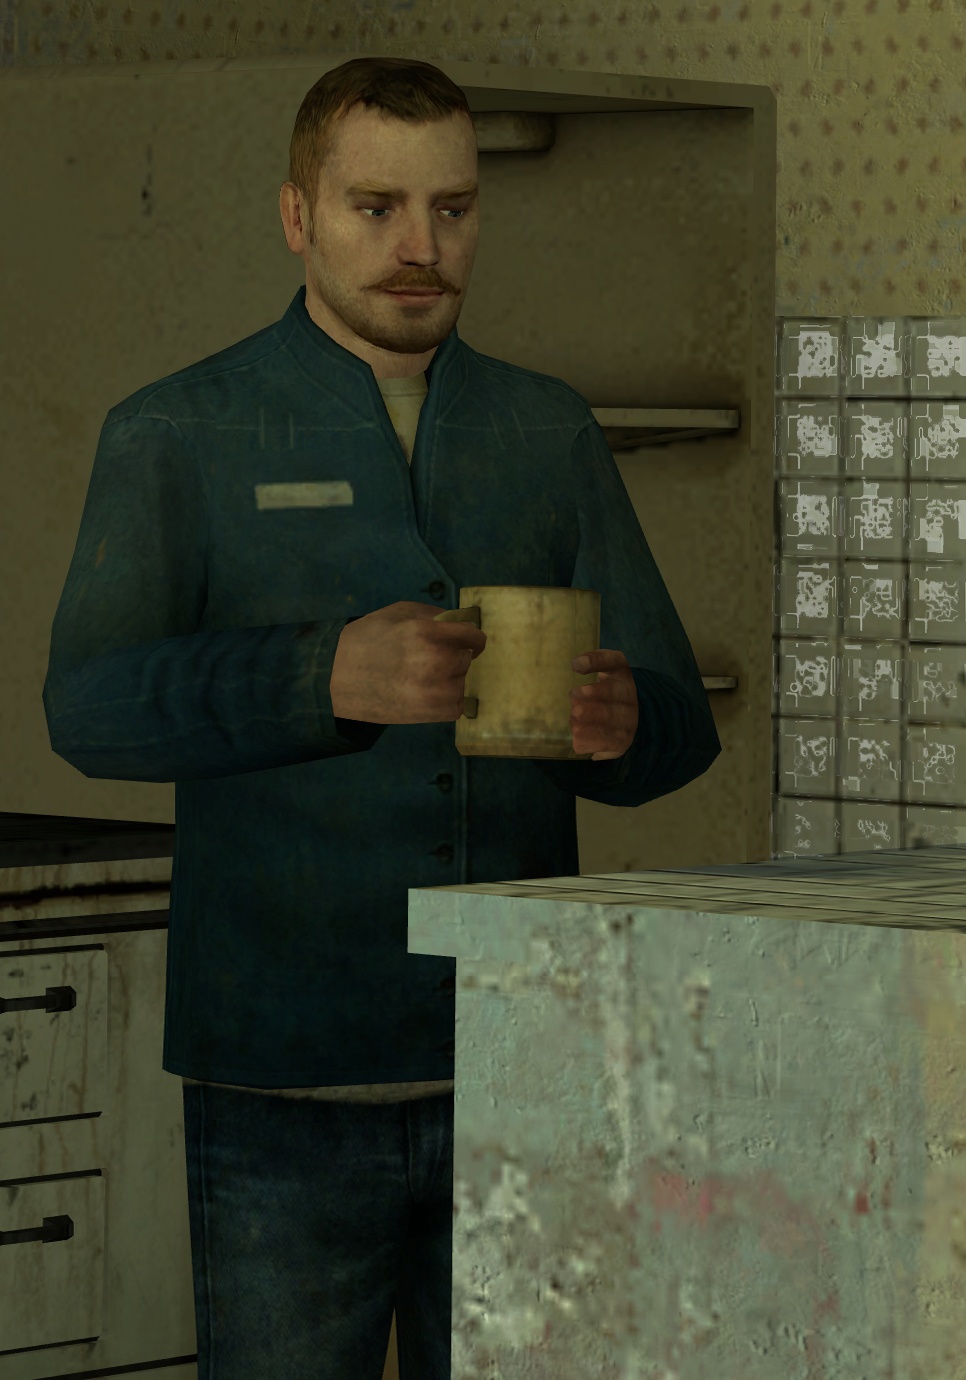 A blond, moustached man in faded blue overalls is holding the cup, a small hint of a smile on his face.